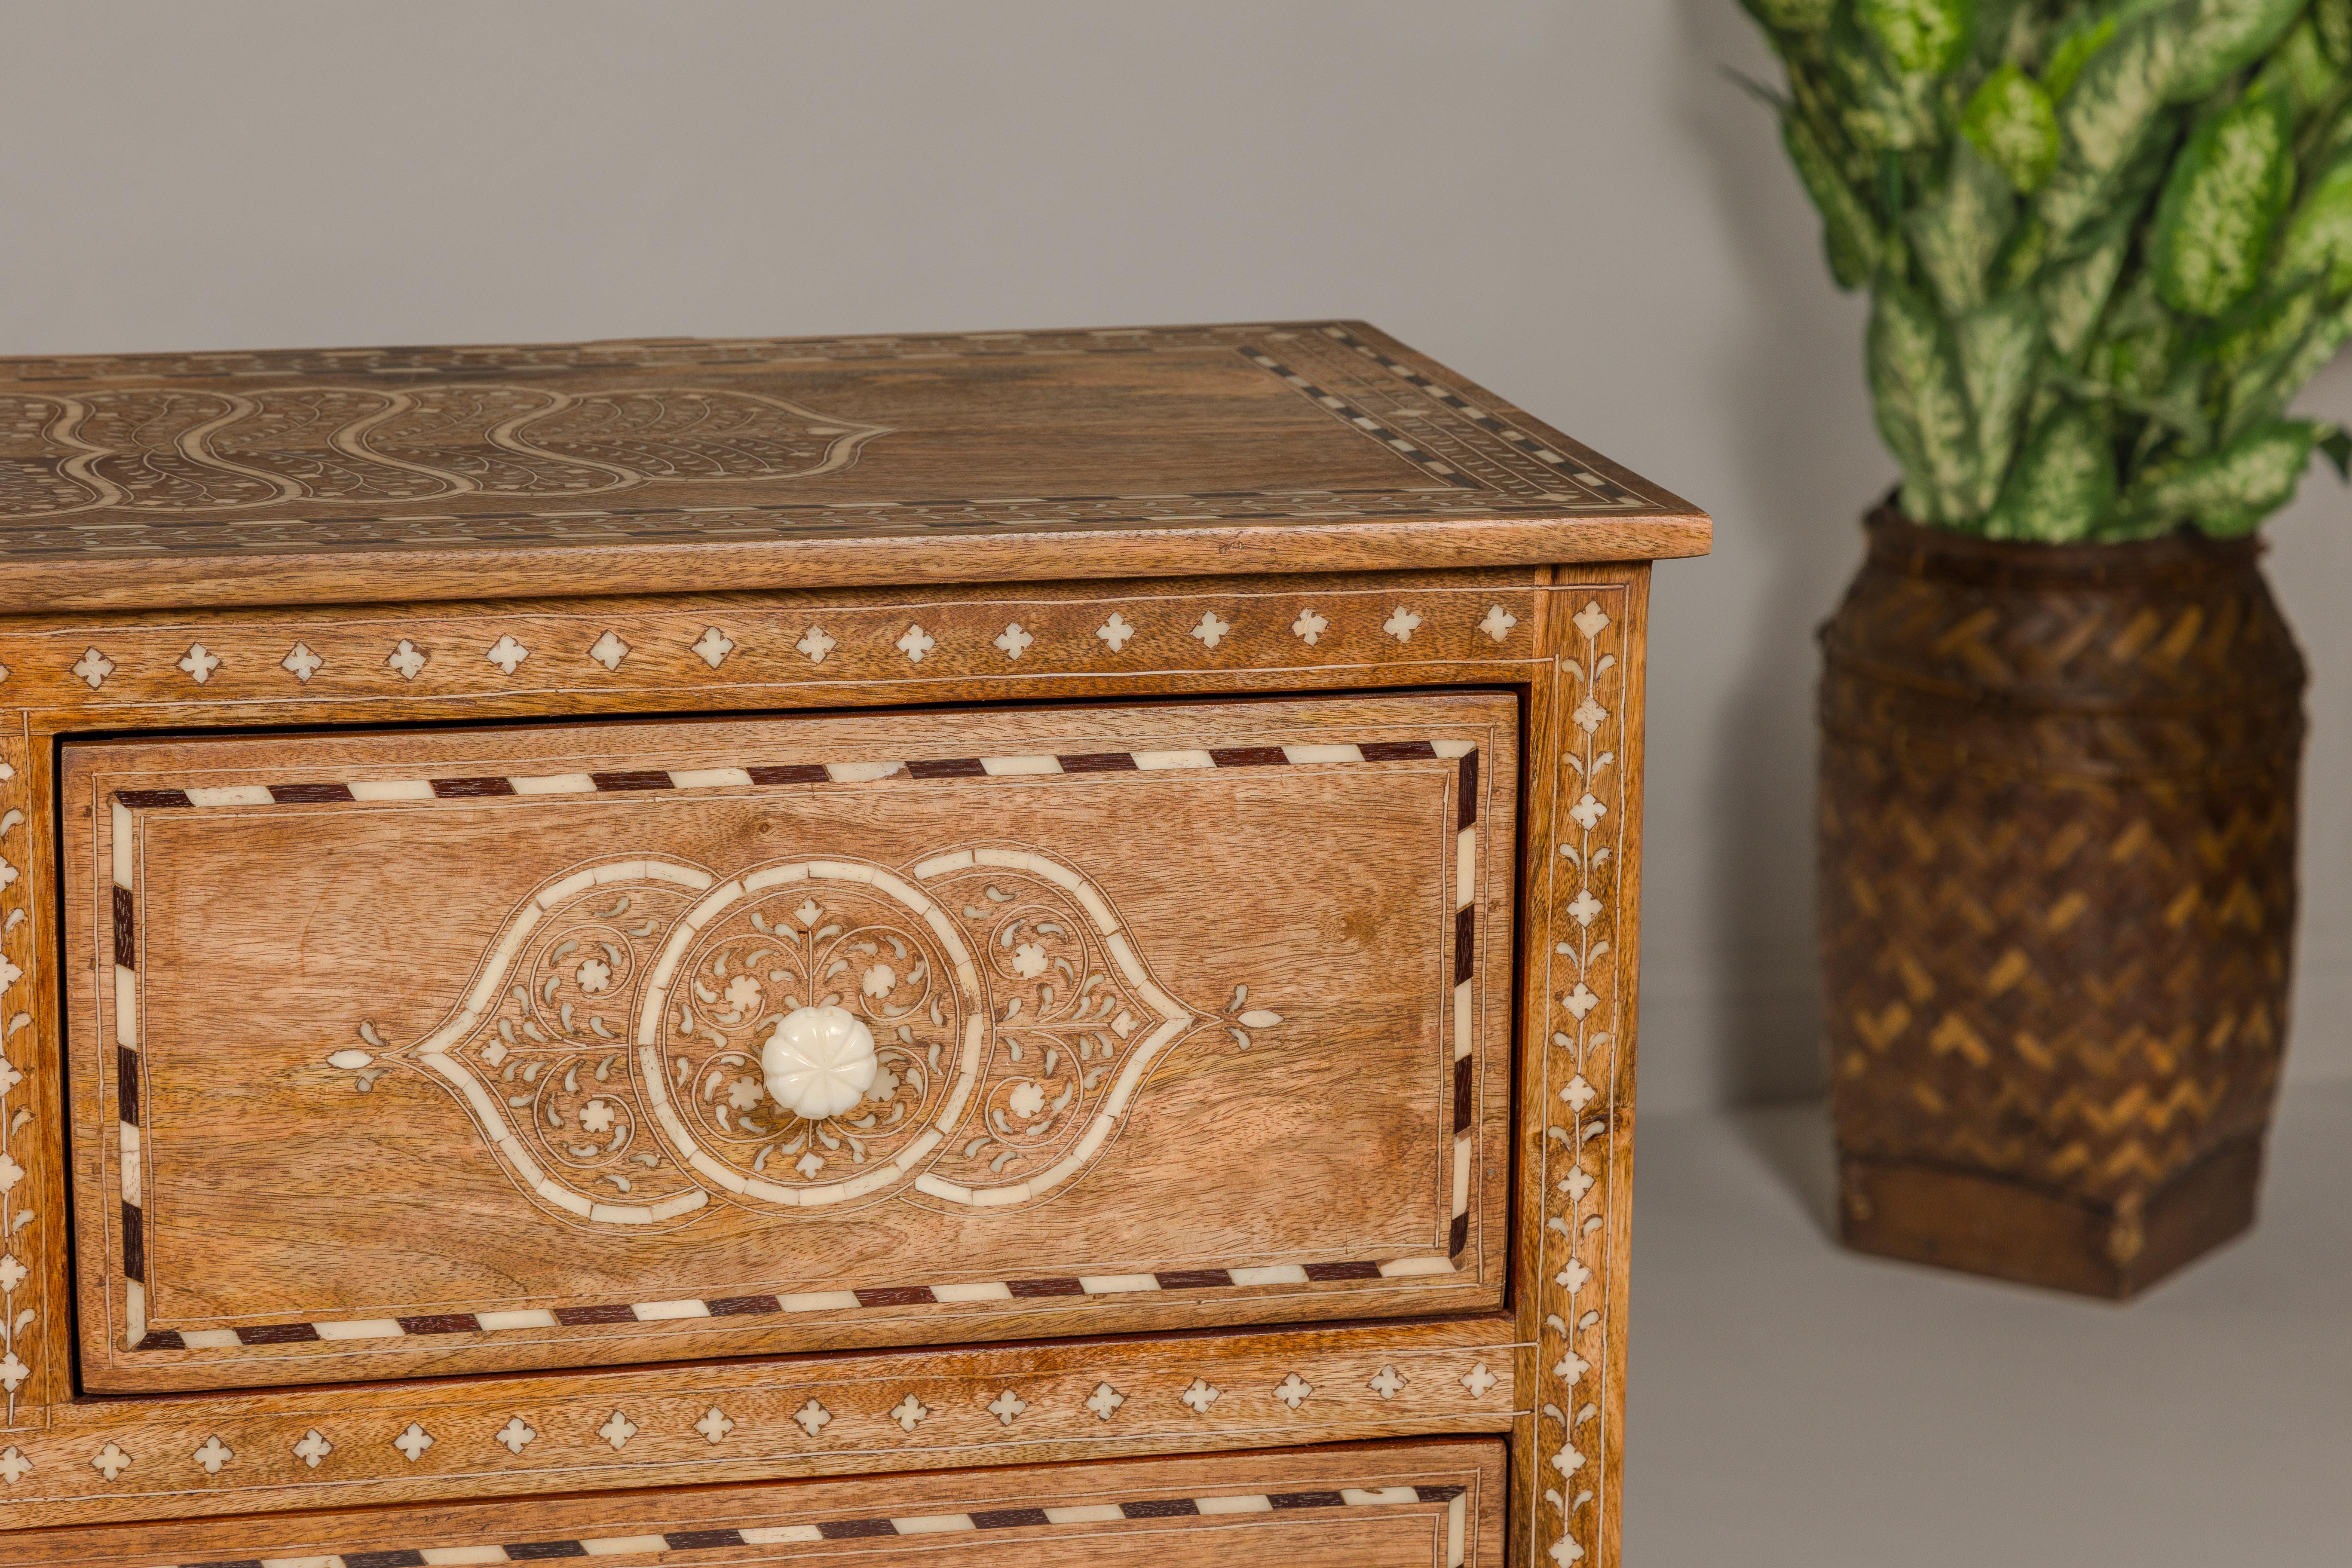 Anglo-Indian Mango Wood Four-Drawer Chest with Floral Themed Bone Inlay In Excellent Condition For Sale In Yonkers, NY